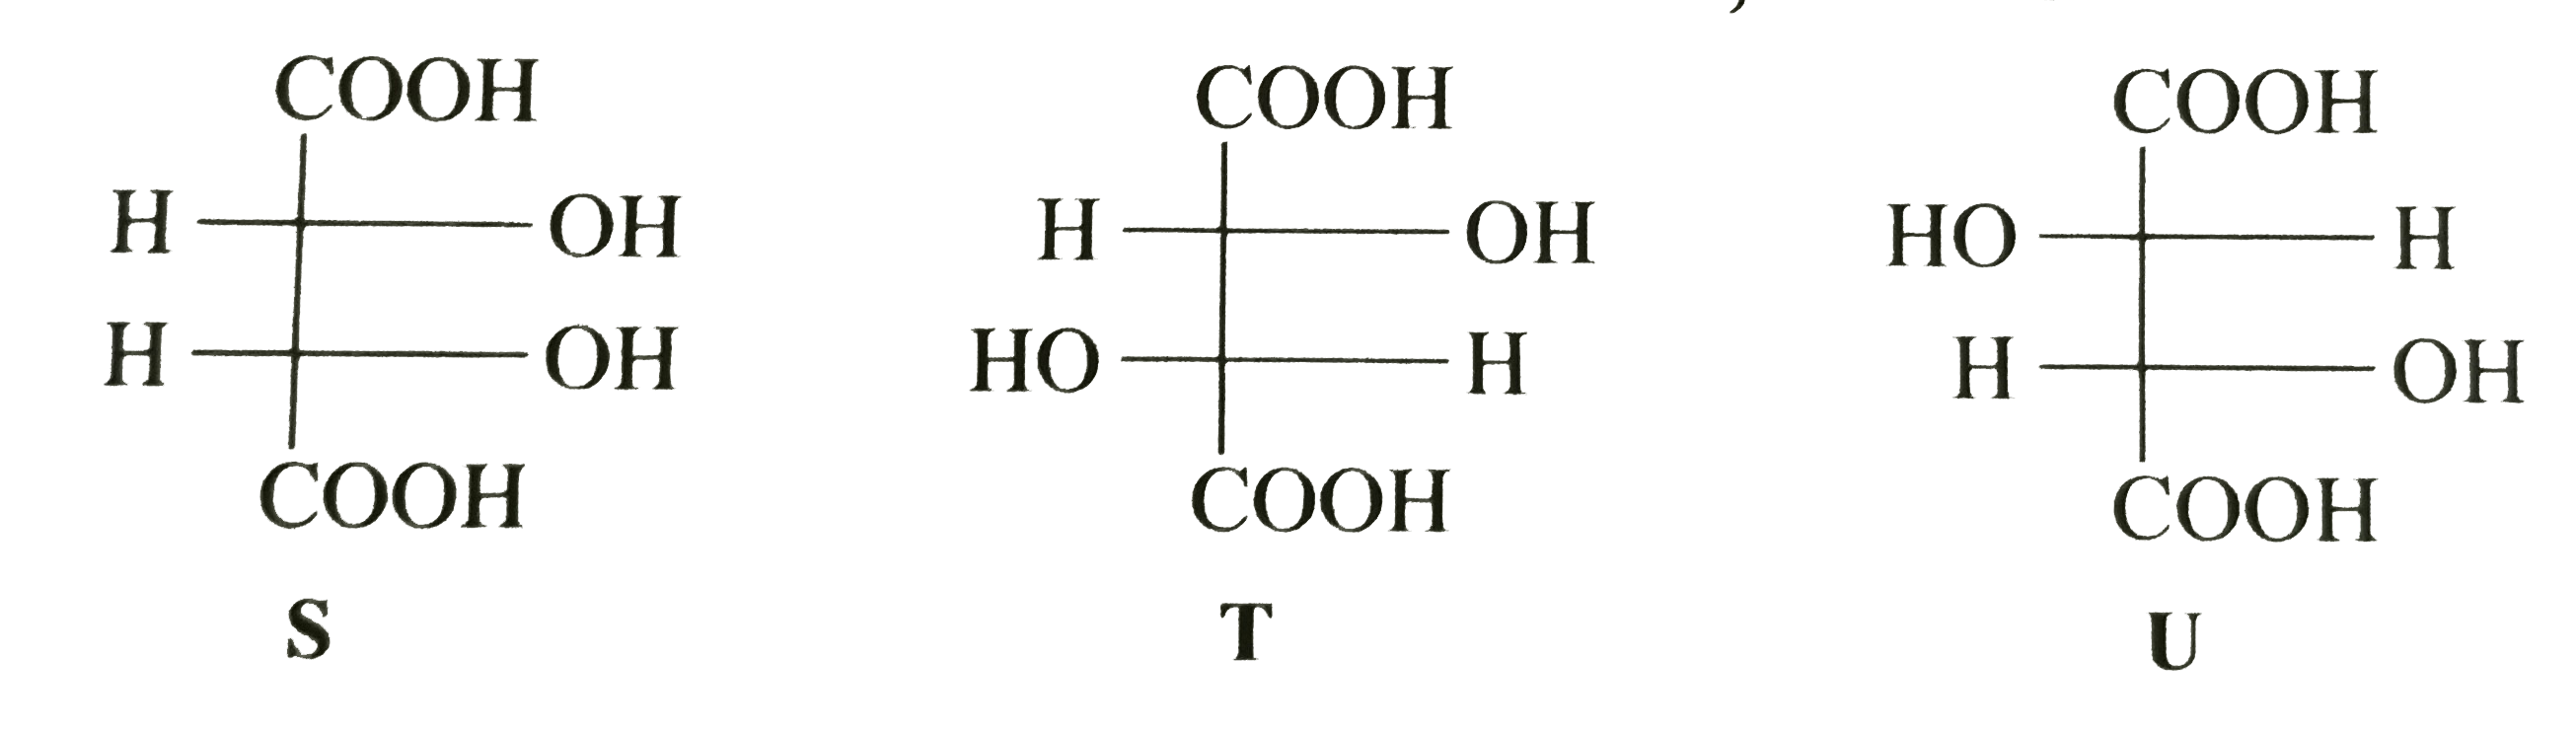 P and Q are isomers of dicarboxyhc acid C(4)H4O(4) .Both decolourize Br(2)//H(2)O On heating, P forms the cyclic anhydride.    Upon treatment with dilute alkaline KMnO(4), P ass well as Q could produce one or more than one from S. T and U.      Compounds formed form P and Q are, respectively.